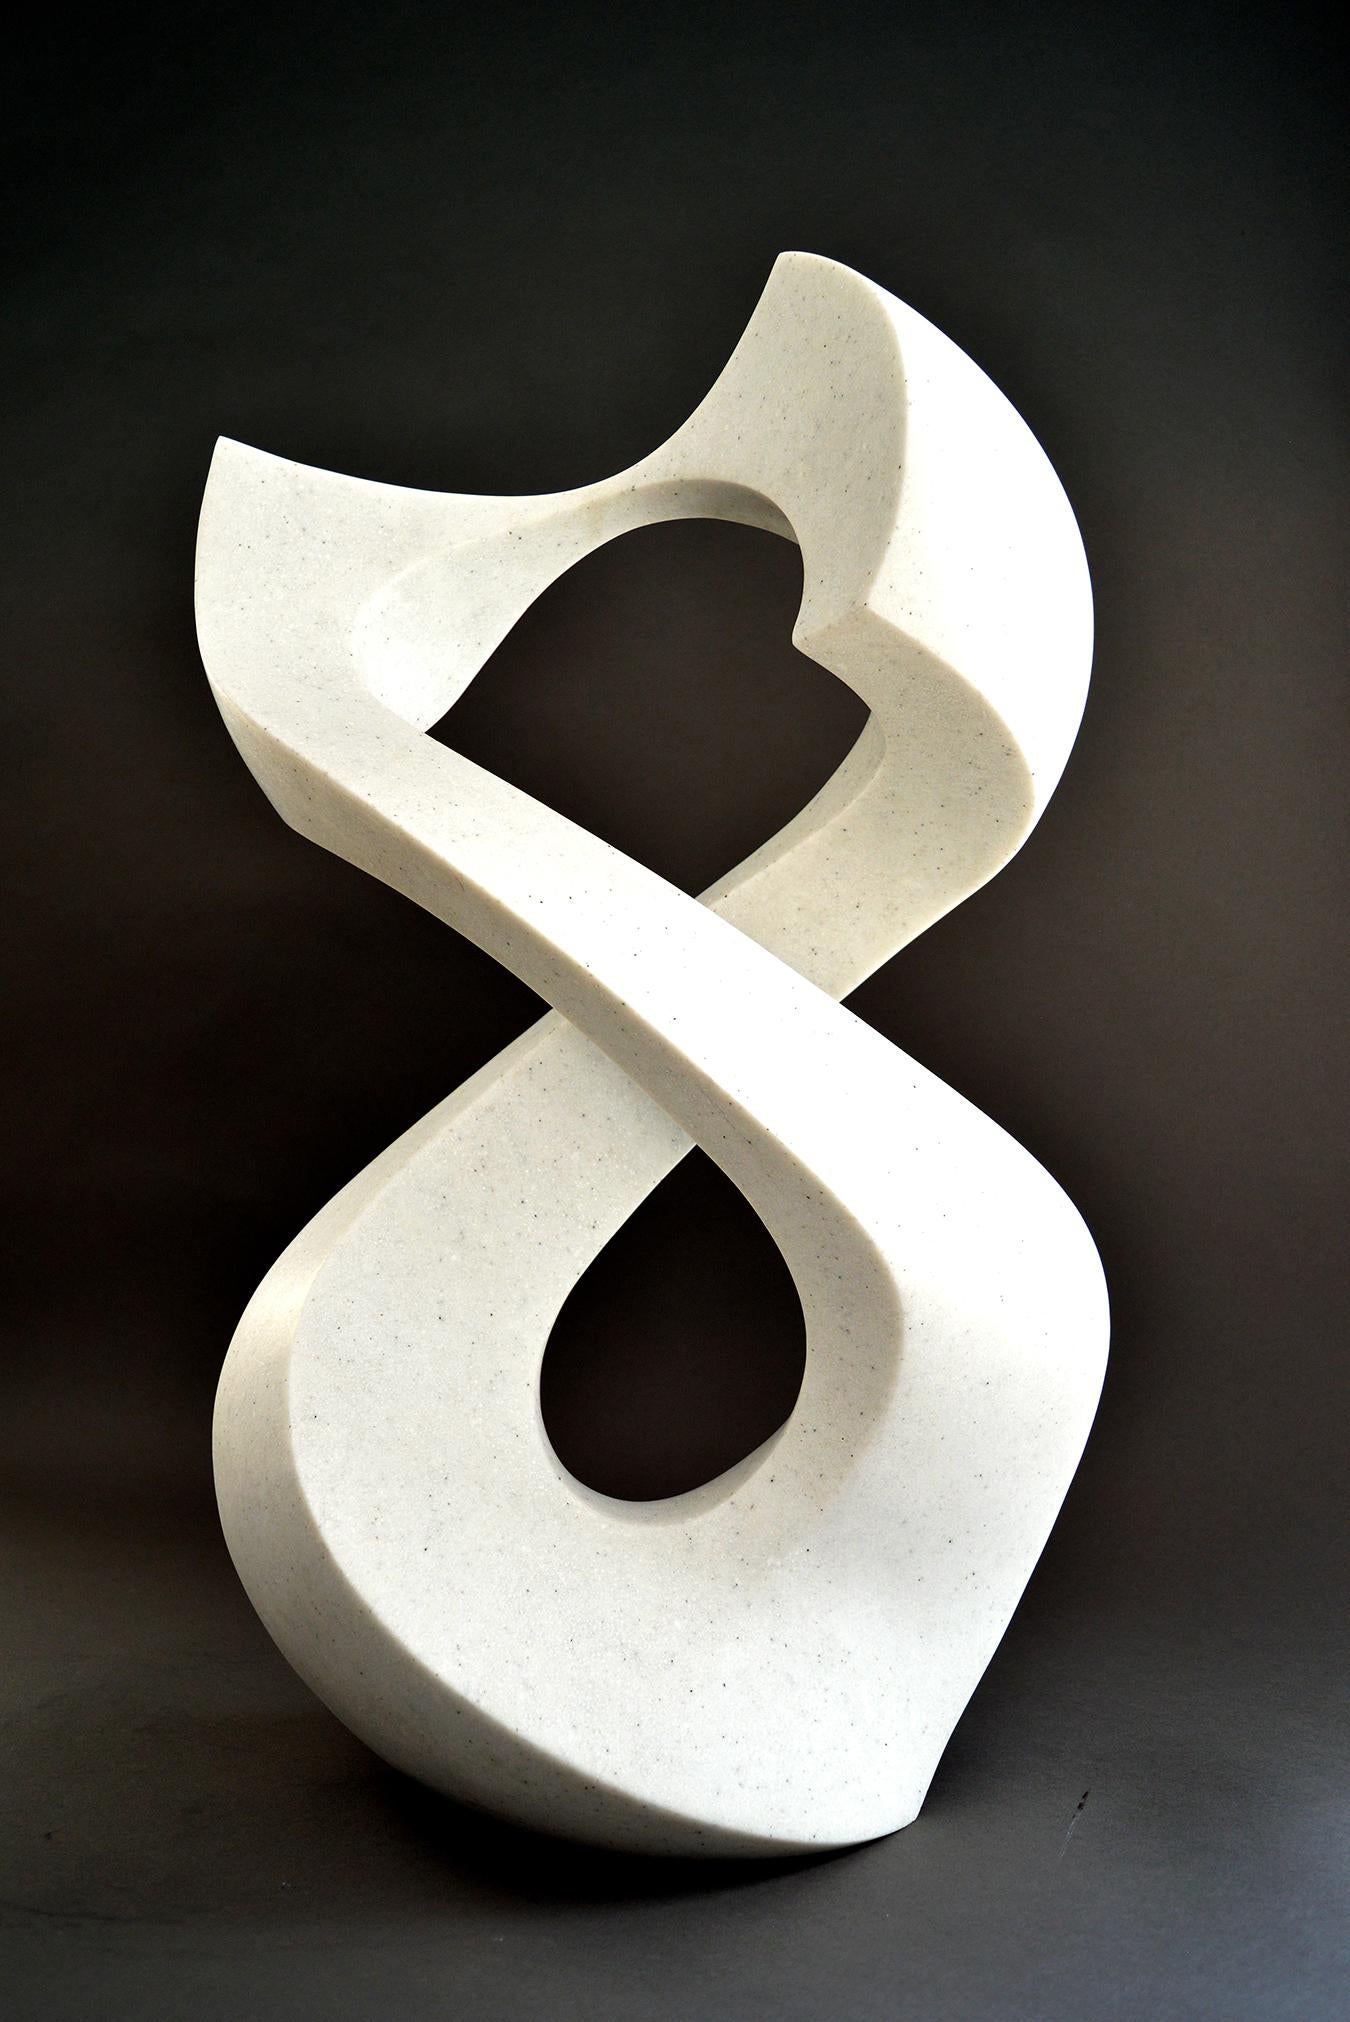 Halcyon White 4/50 - smooth, polished, abstract, engineered stone sculpture For Sale 1